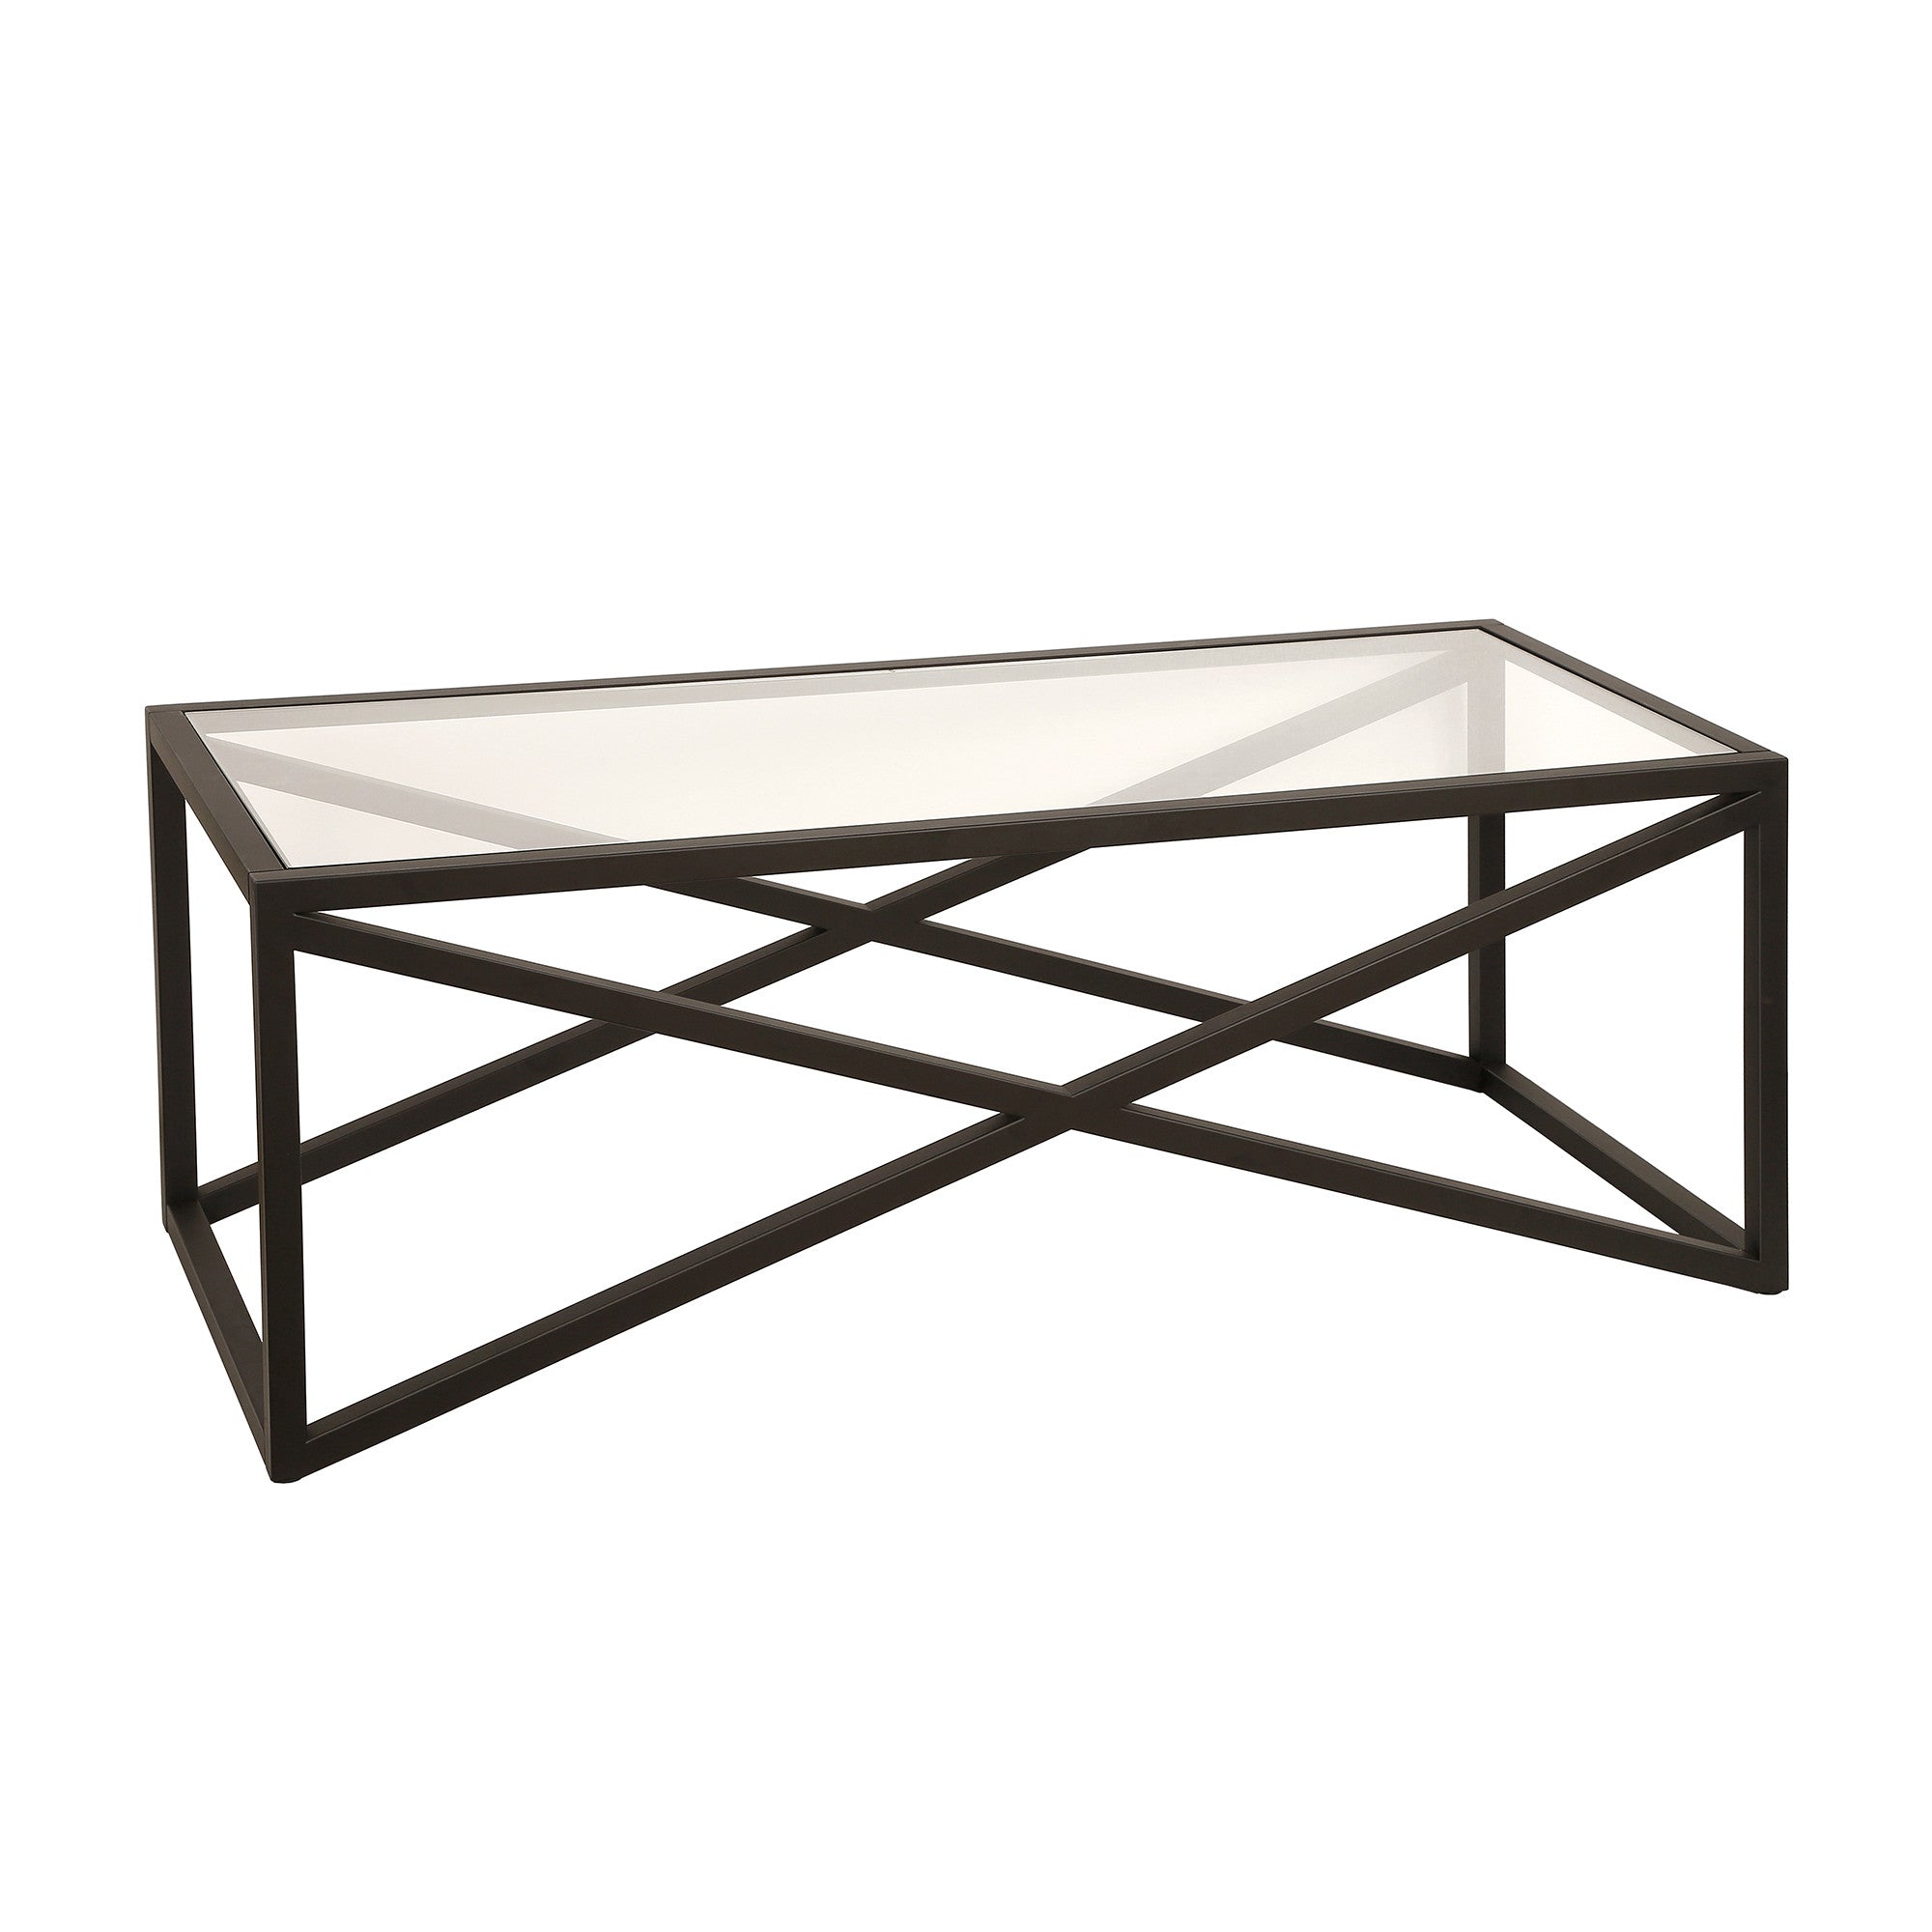 46" Black Glass And Steel Coffee Table